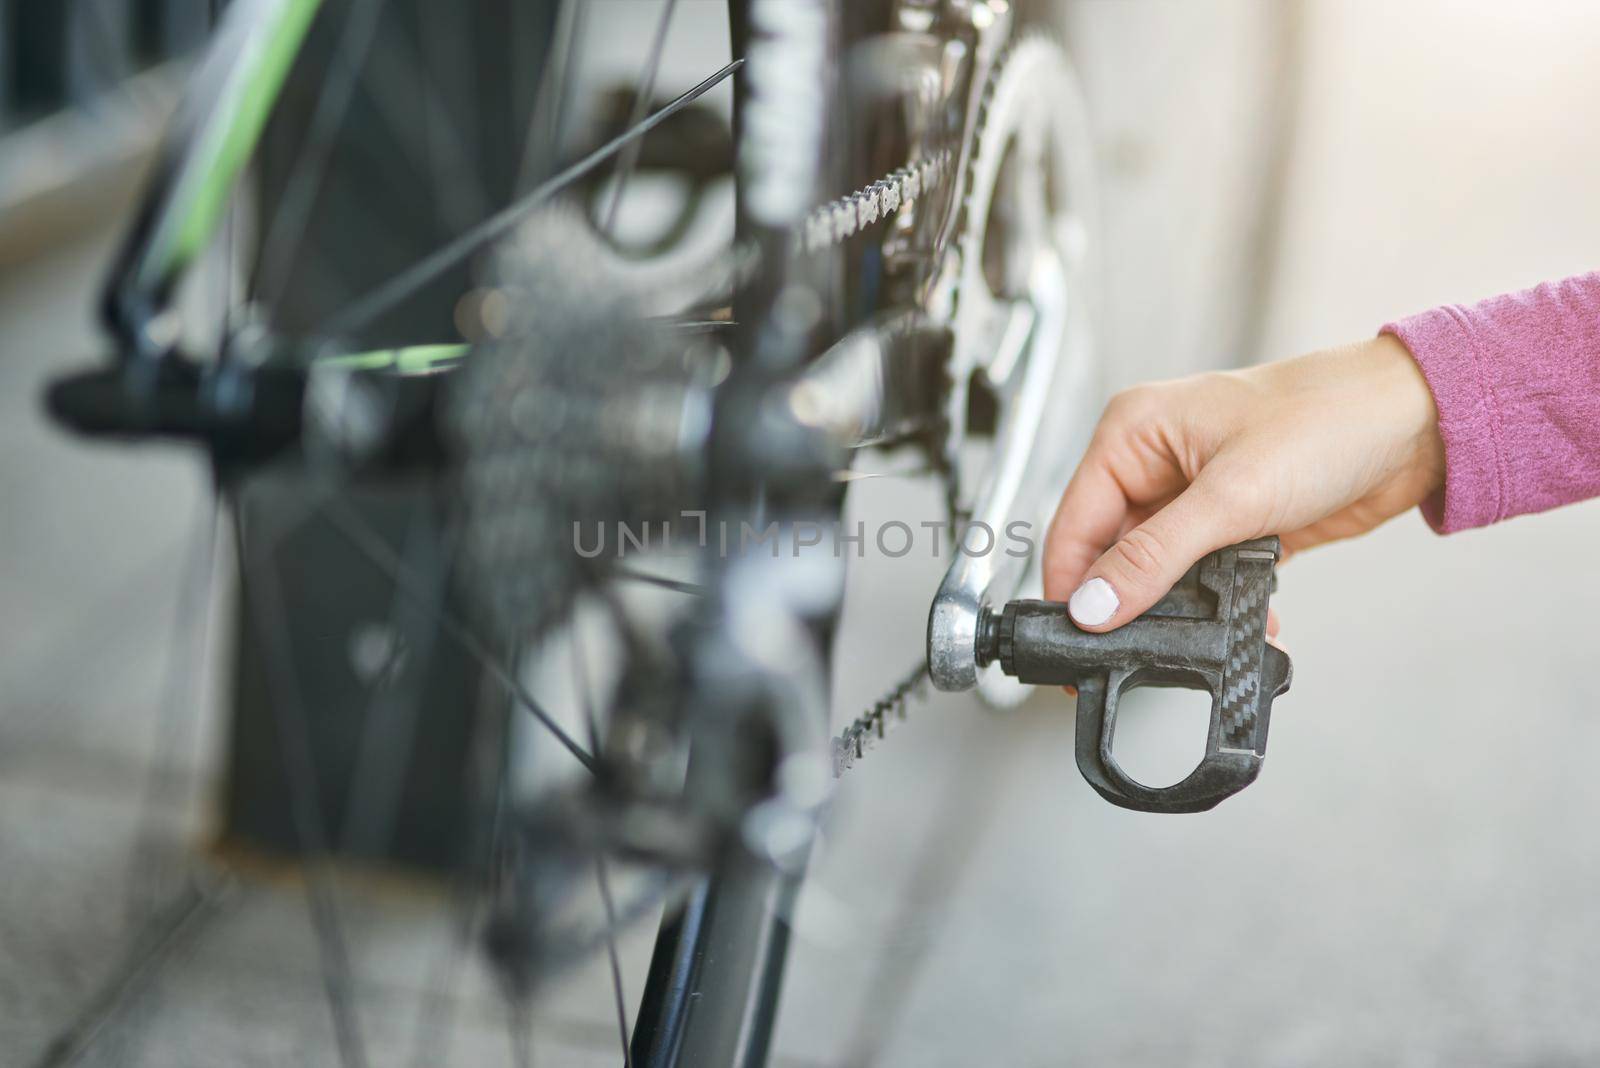 Close up shot of hand of female cyclist checking her bicycle mechanisms, sprocket and pedal on a mountain bike outdoors on a daytime. Safety, sports, active lifestyle concept